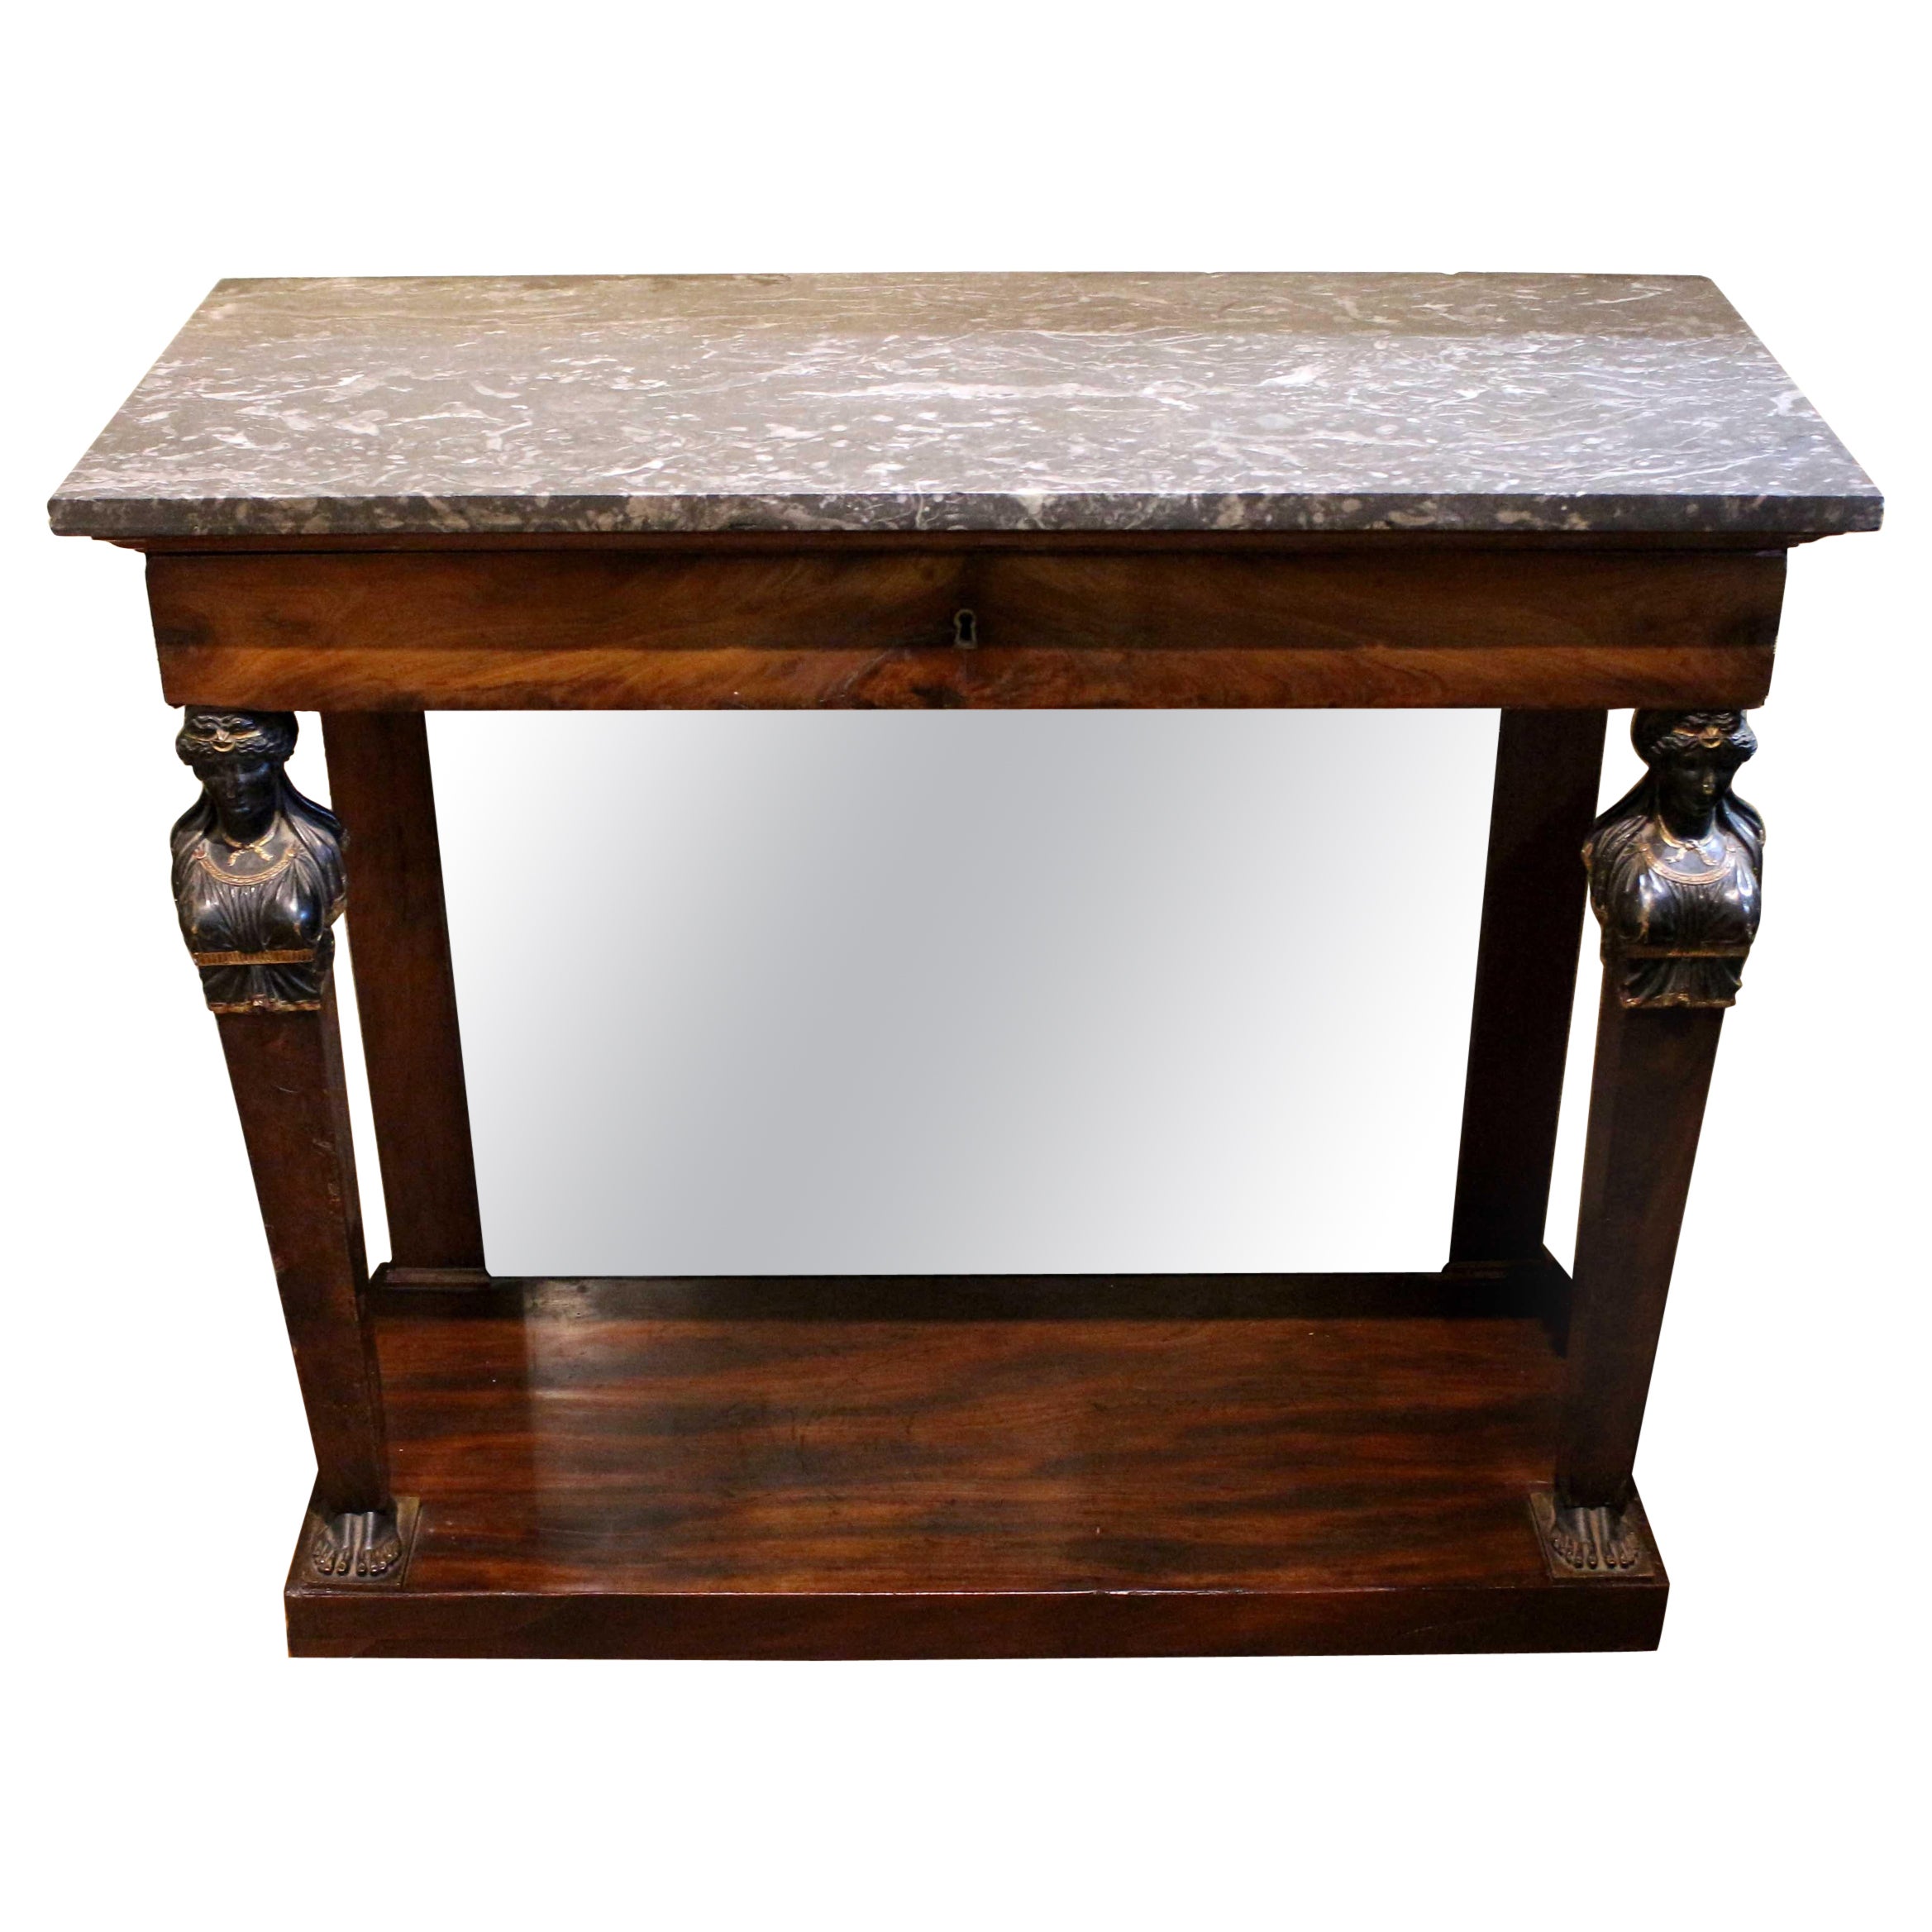 Circa 1810 Empire Period French Marble Top Console Table For Sale